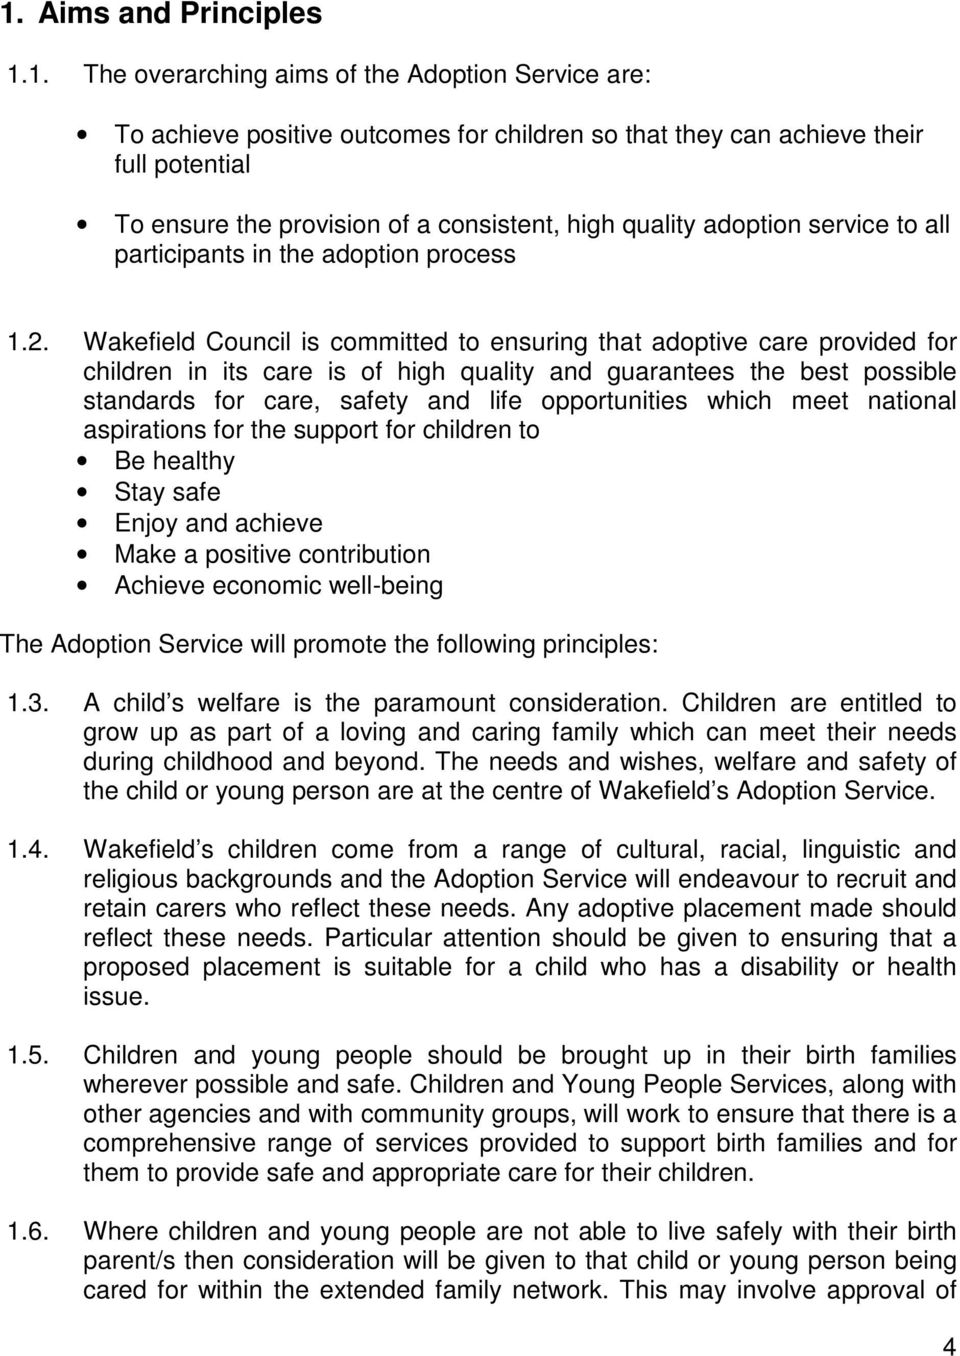 Wakefield Council is committed to ensuring that adoptive care provided for children in its care is of high quality and guarantees the best possible standards for care, safety and life opportunities